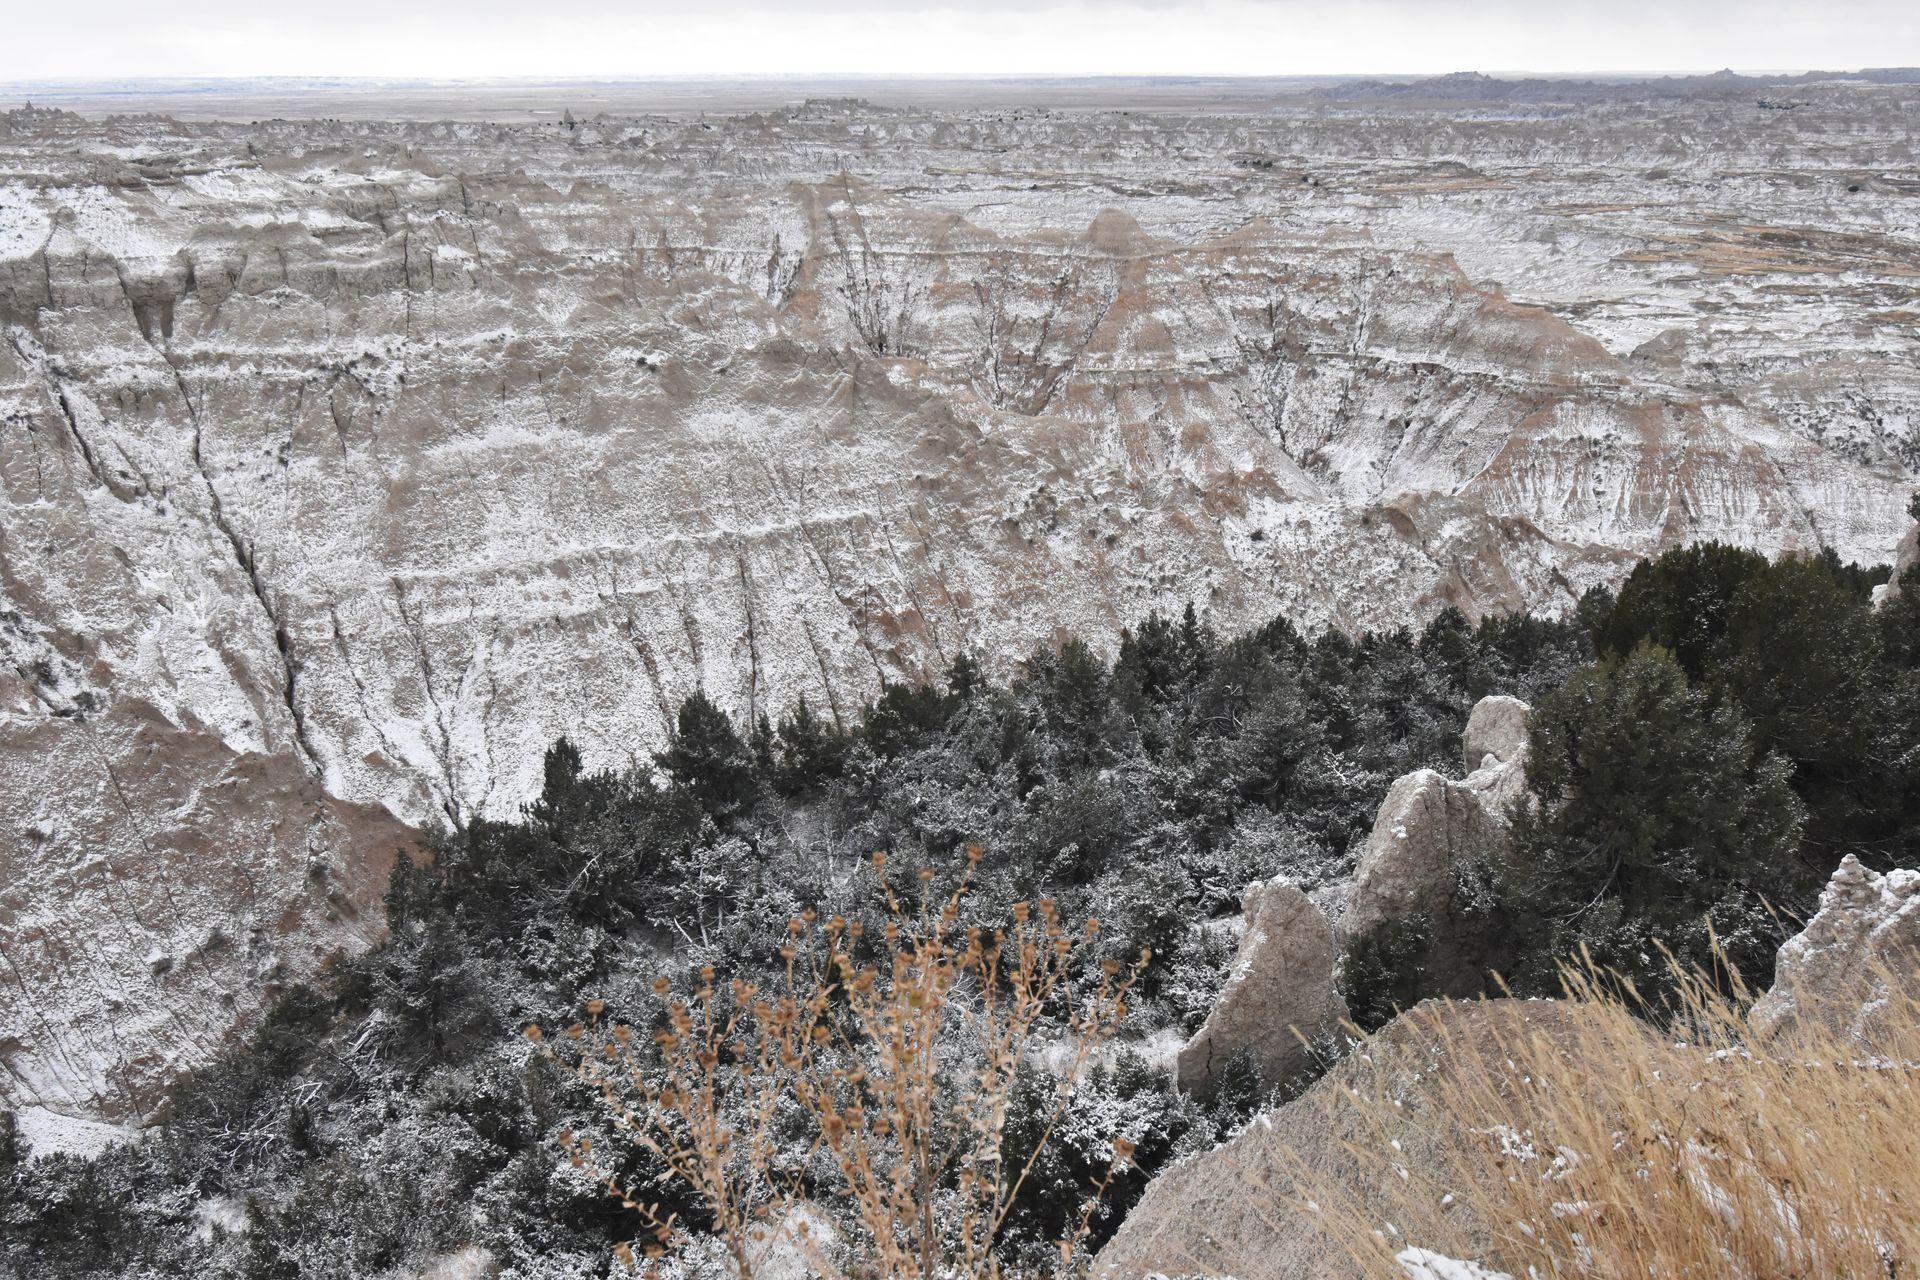 A view of the Badlands dusted in snow.